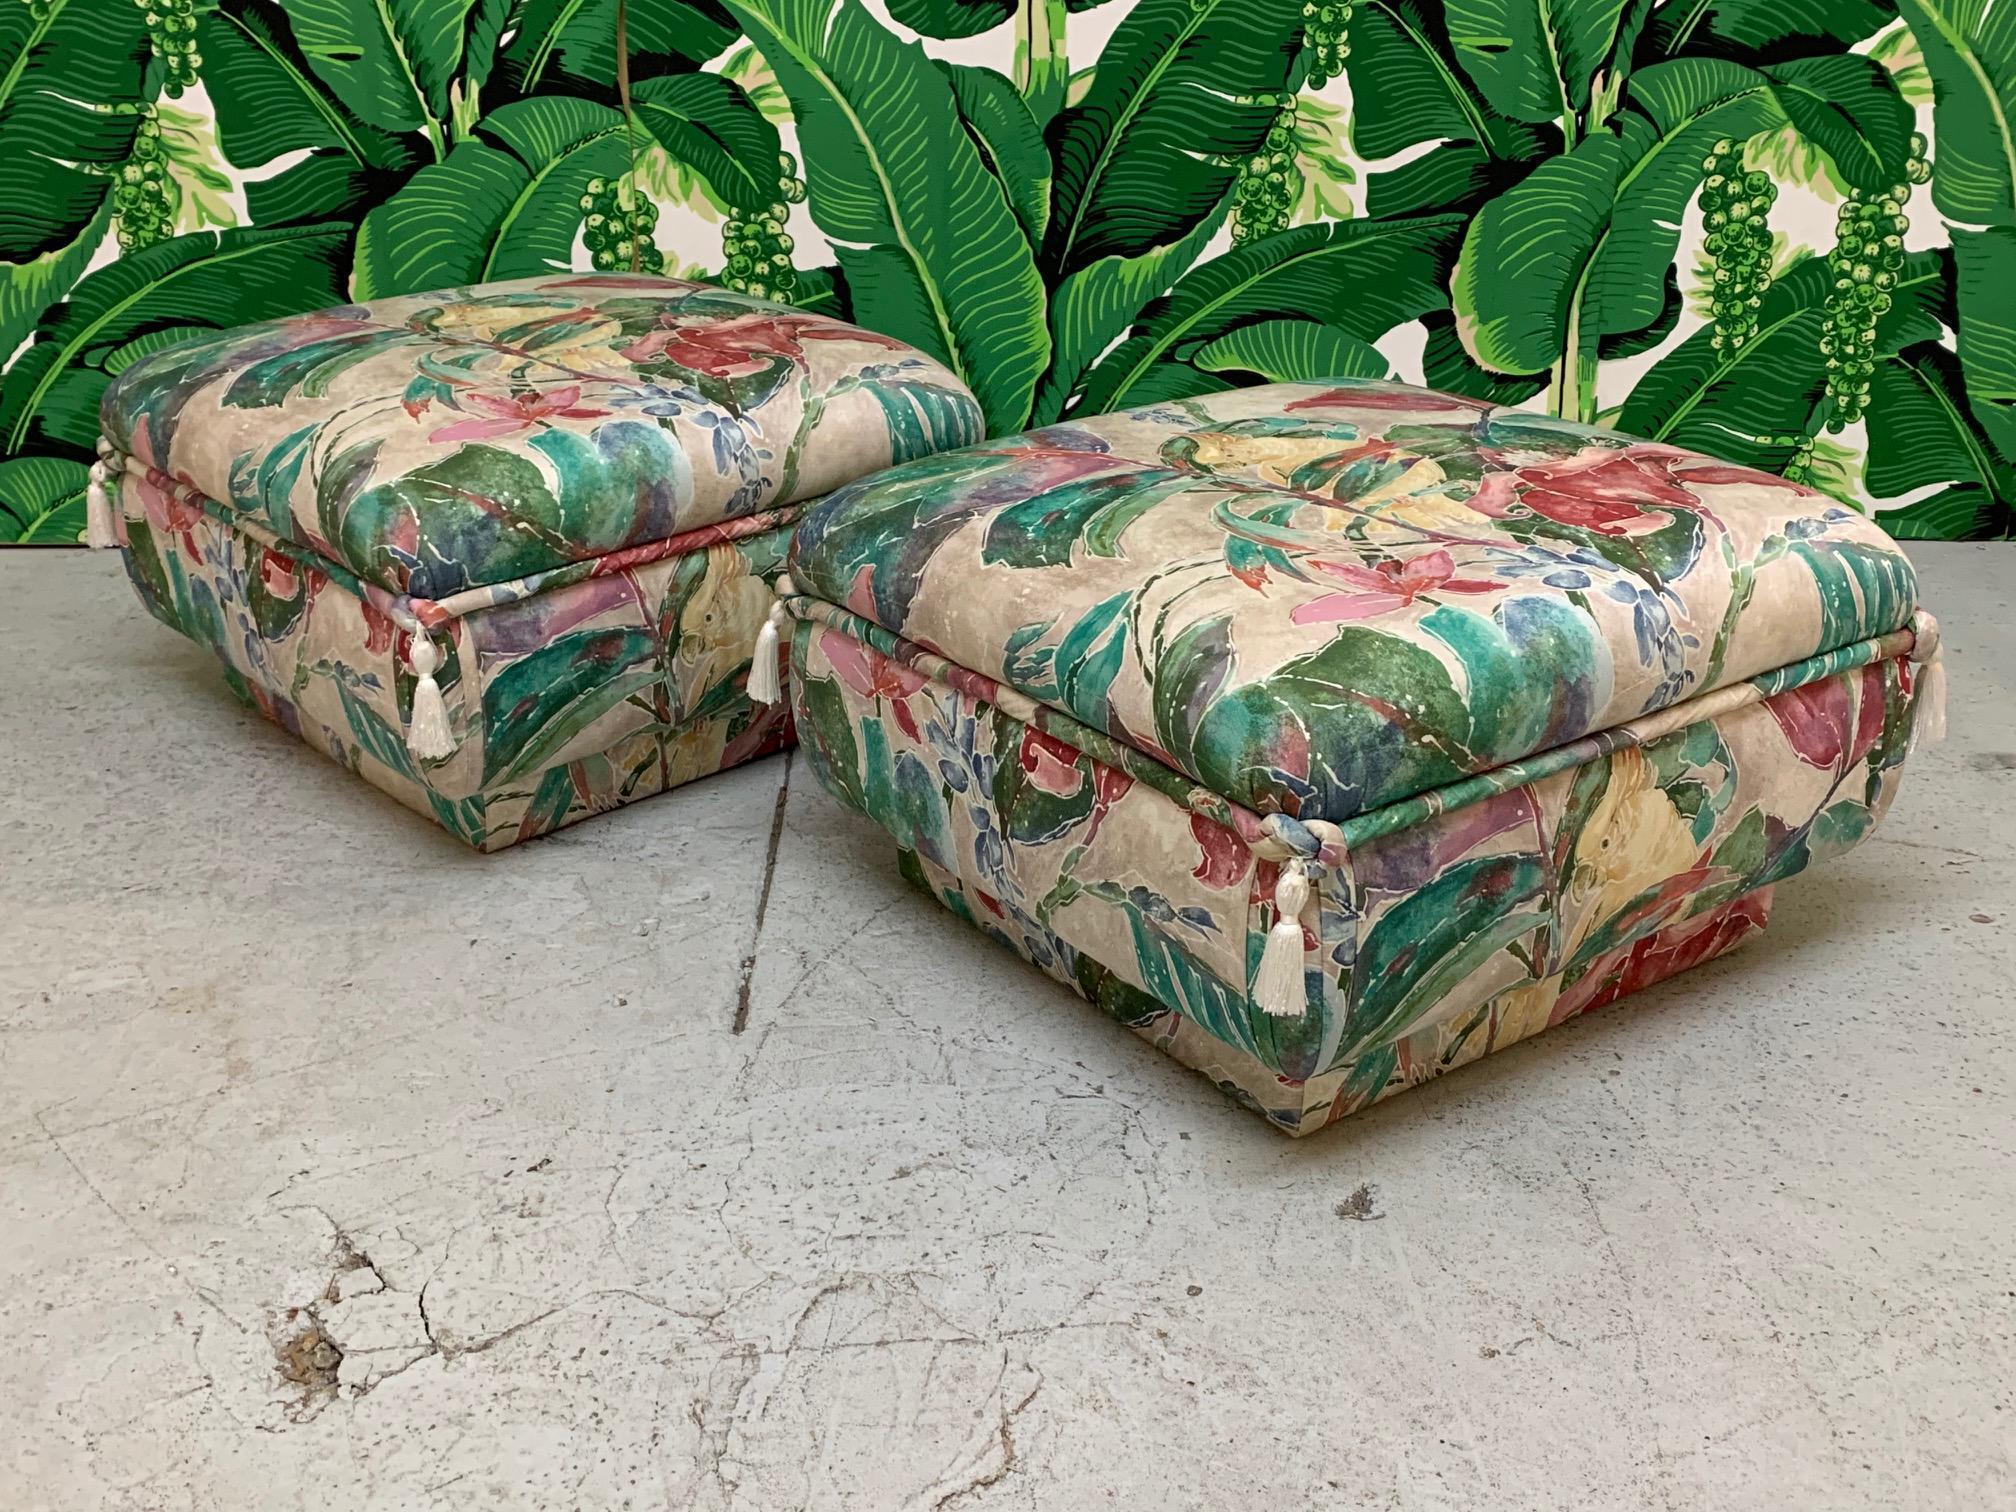 Matching pair of ottomans feature a bold print with tropical birds and flowers along with decorative tassels and an upholstered plinth base. Can be used as seating or footstools. Very comfortable! Very good condition with no stains, tears, or marks.